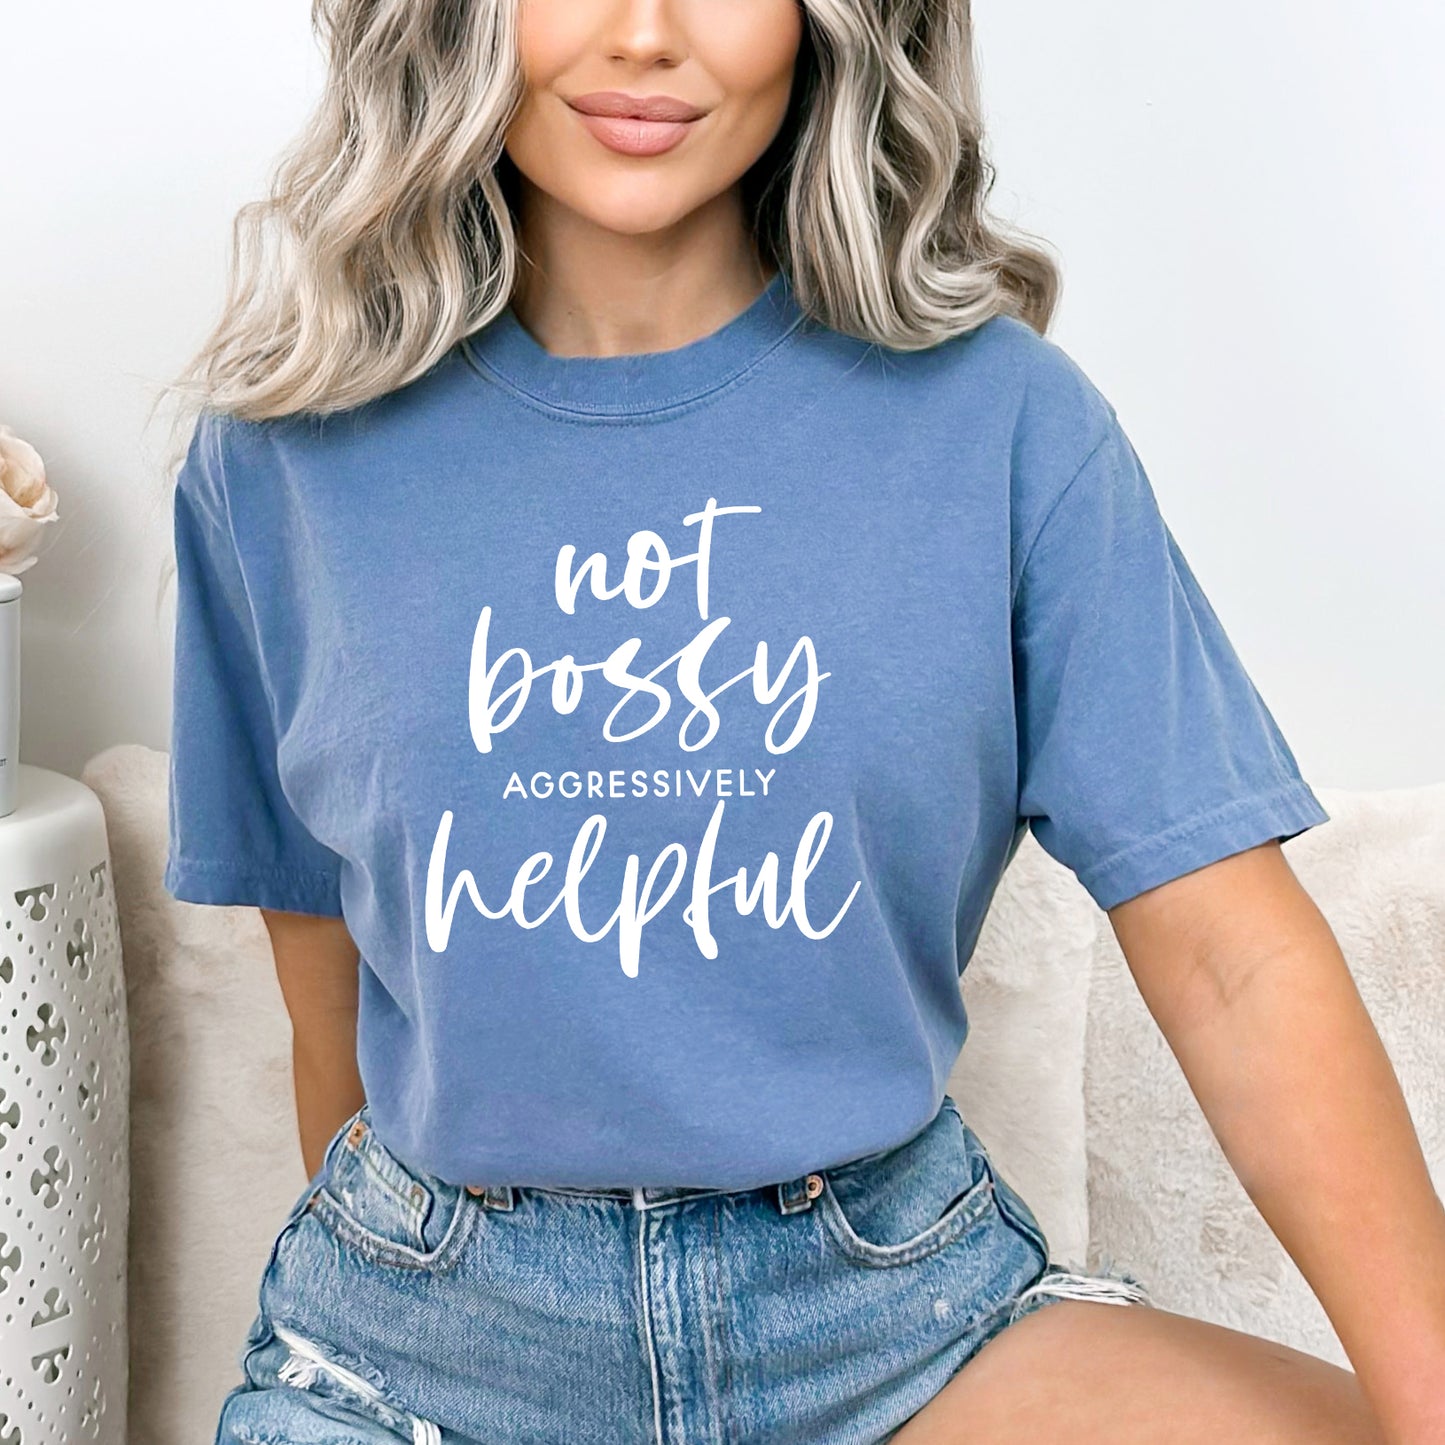 Not Bossy Aggressively Helpful | Garment Dyed Short Sleeve Tee